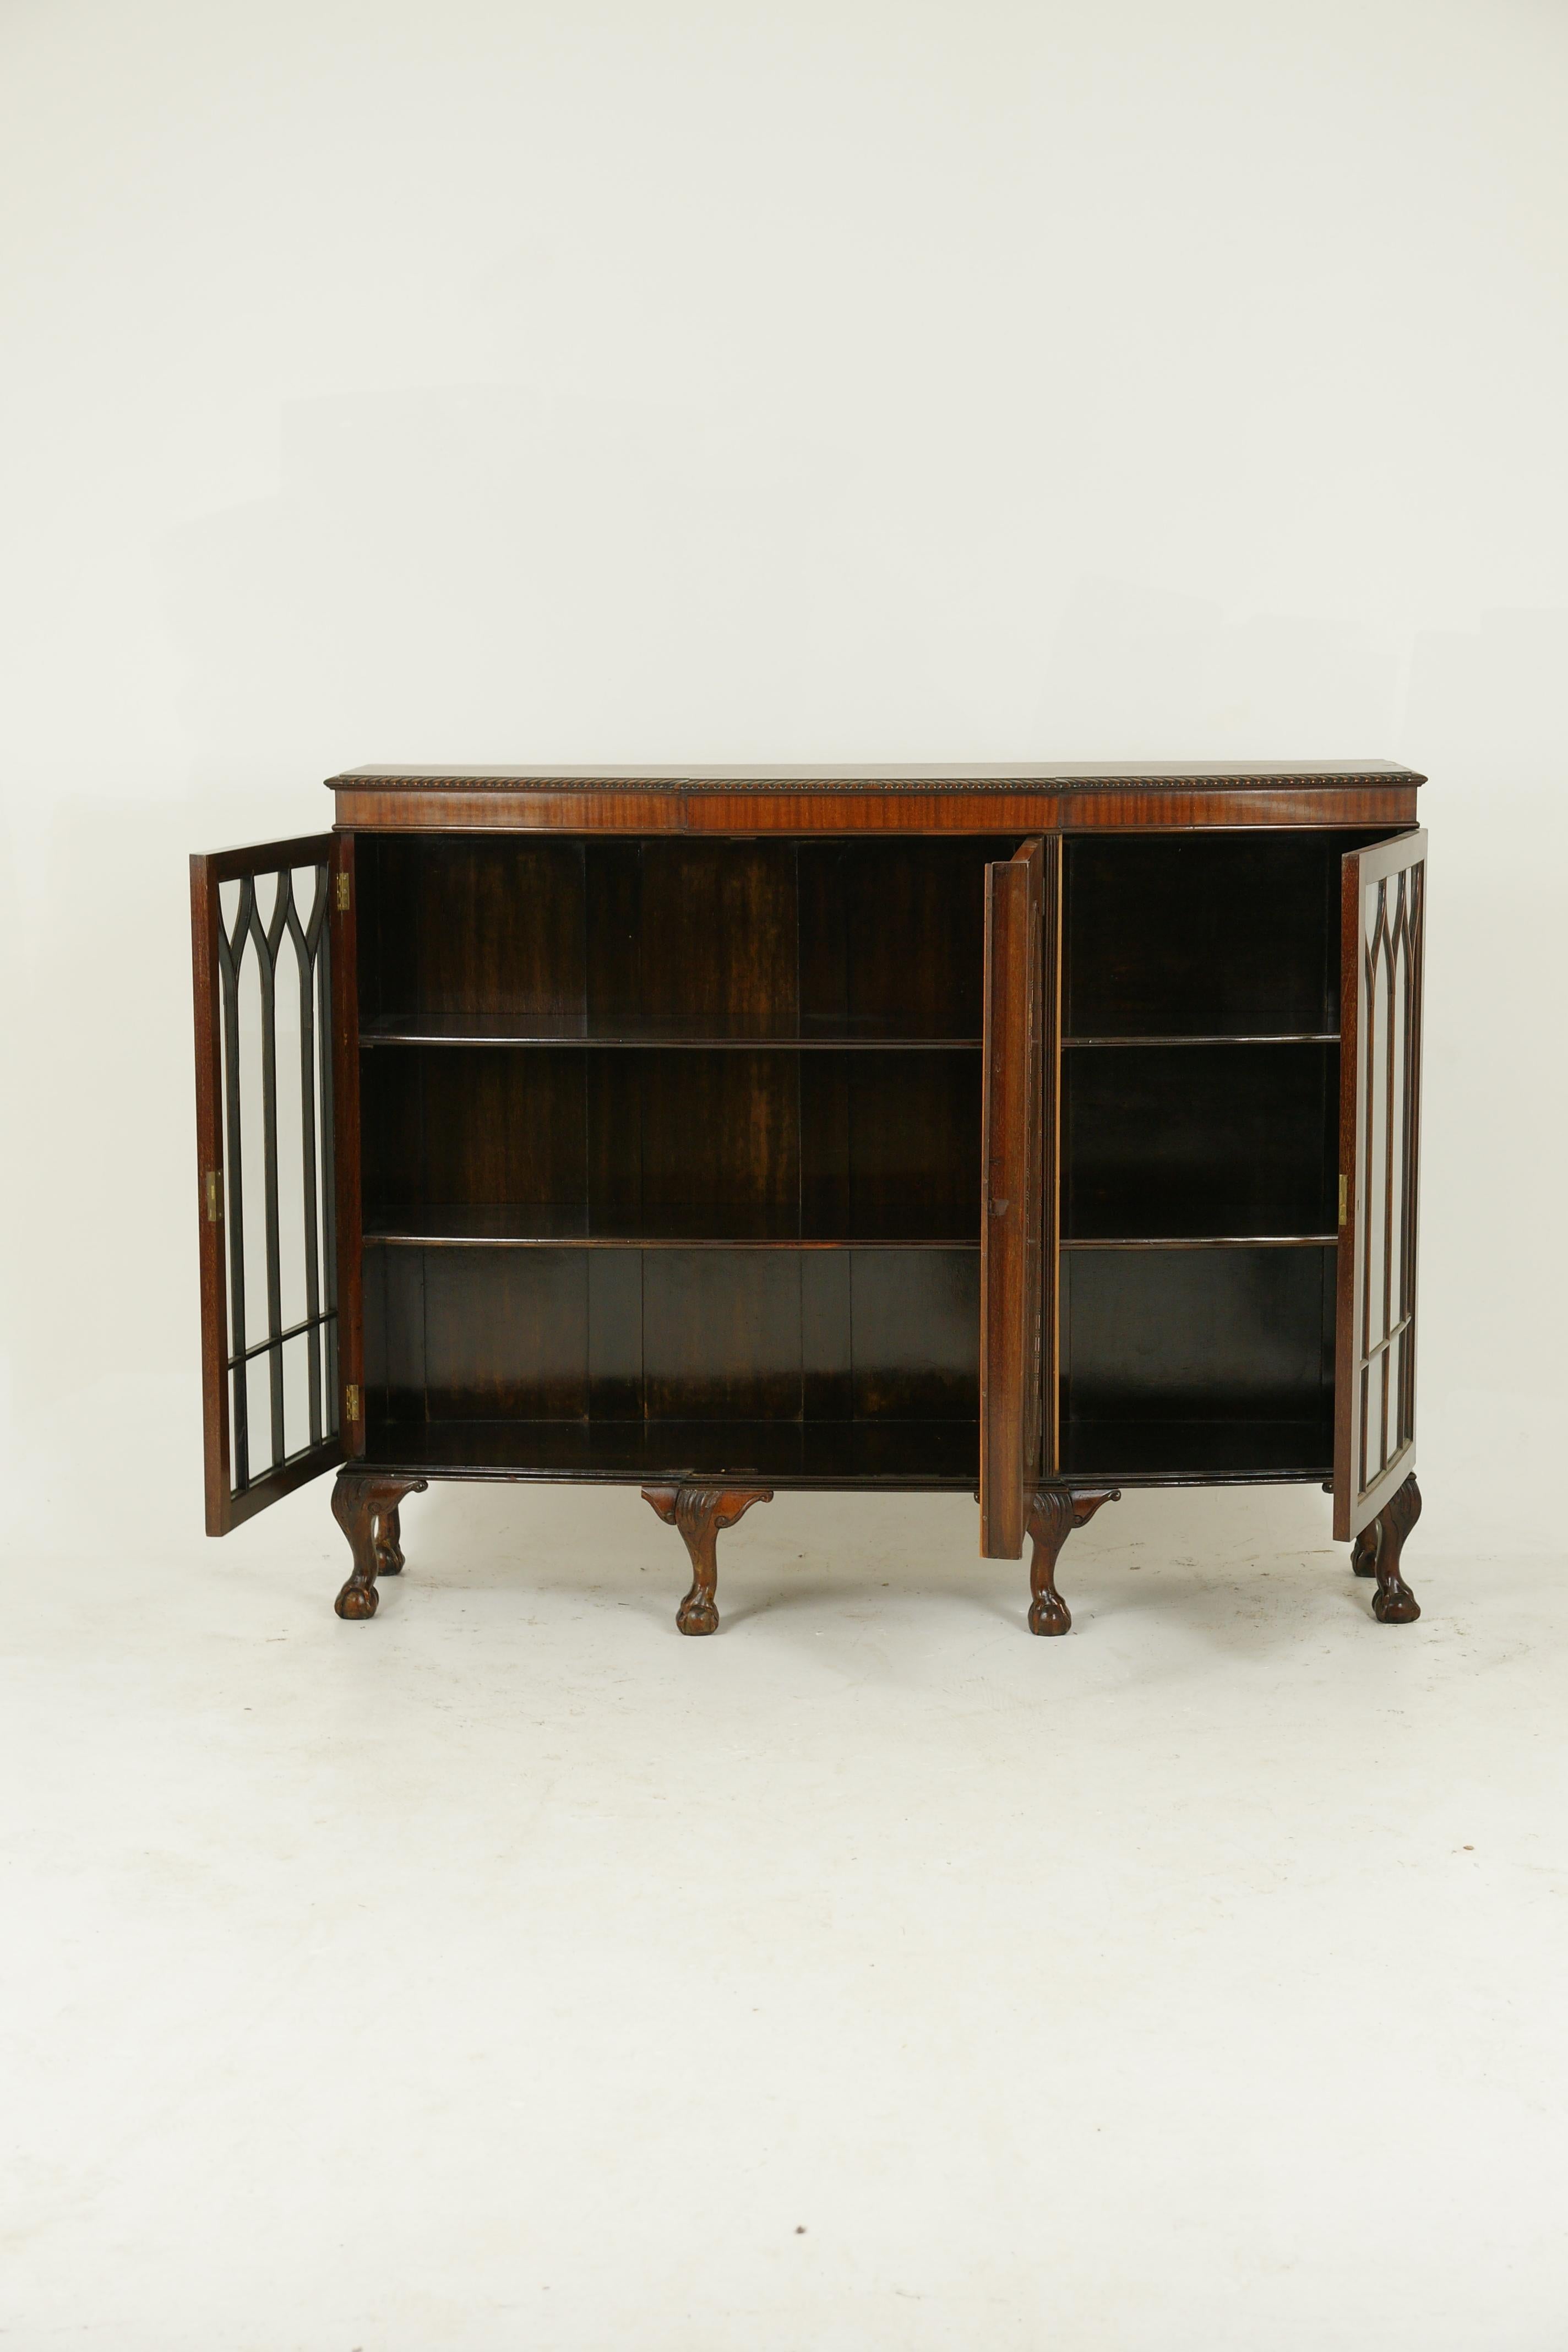 Chippendale bookcase, antique walnut bookcase, break front cabinet, Scotland 1920, antique furniture, B1239

Scotland, 1920
Solid walnut and veneers
Original finish
Rectangular top
Carved moulded edge above paneled blank door
Oval veneered